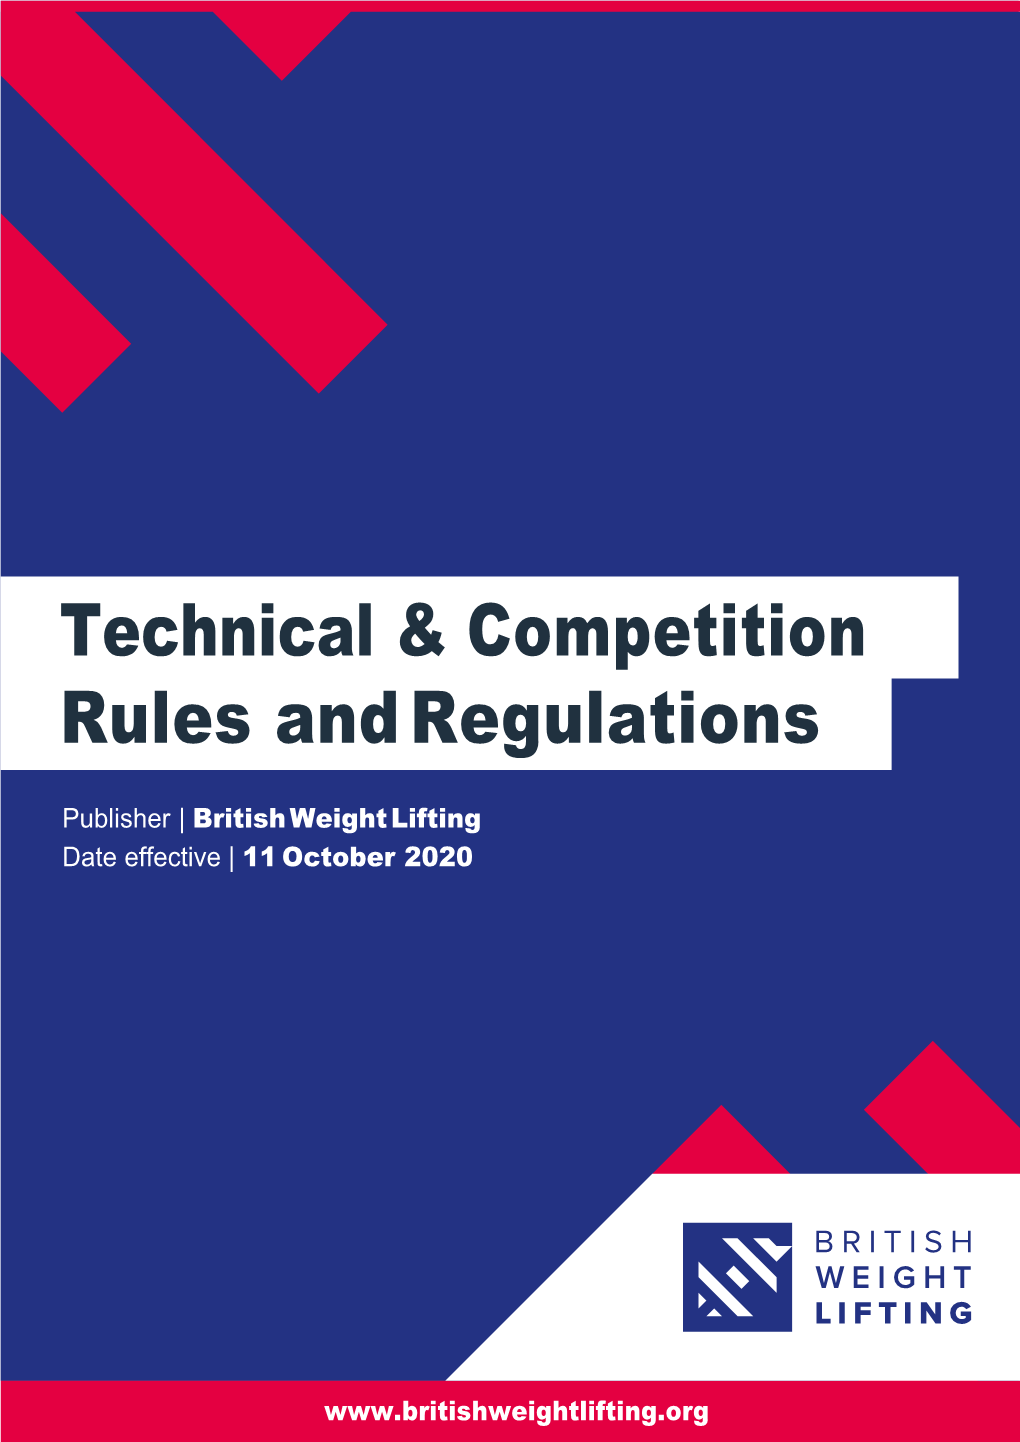 Technical & Competition Rules and Regulations